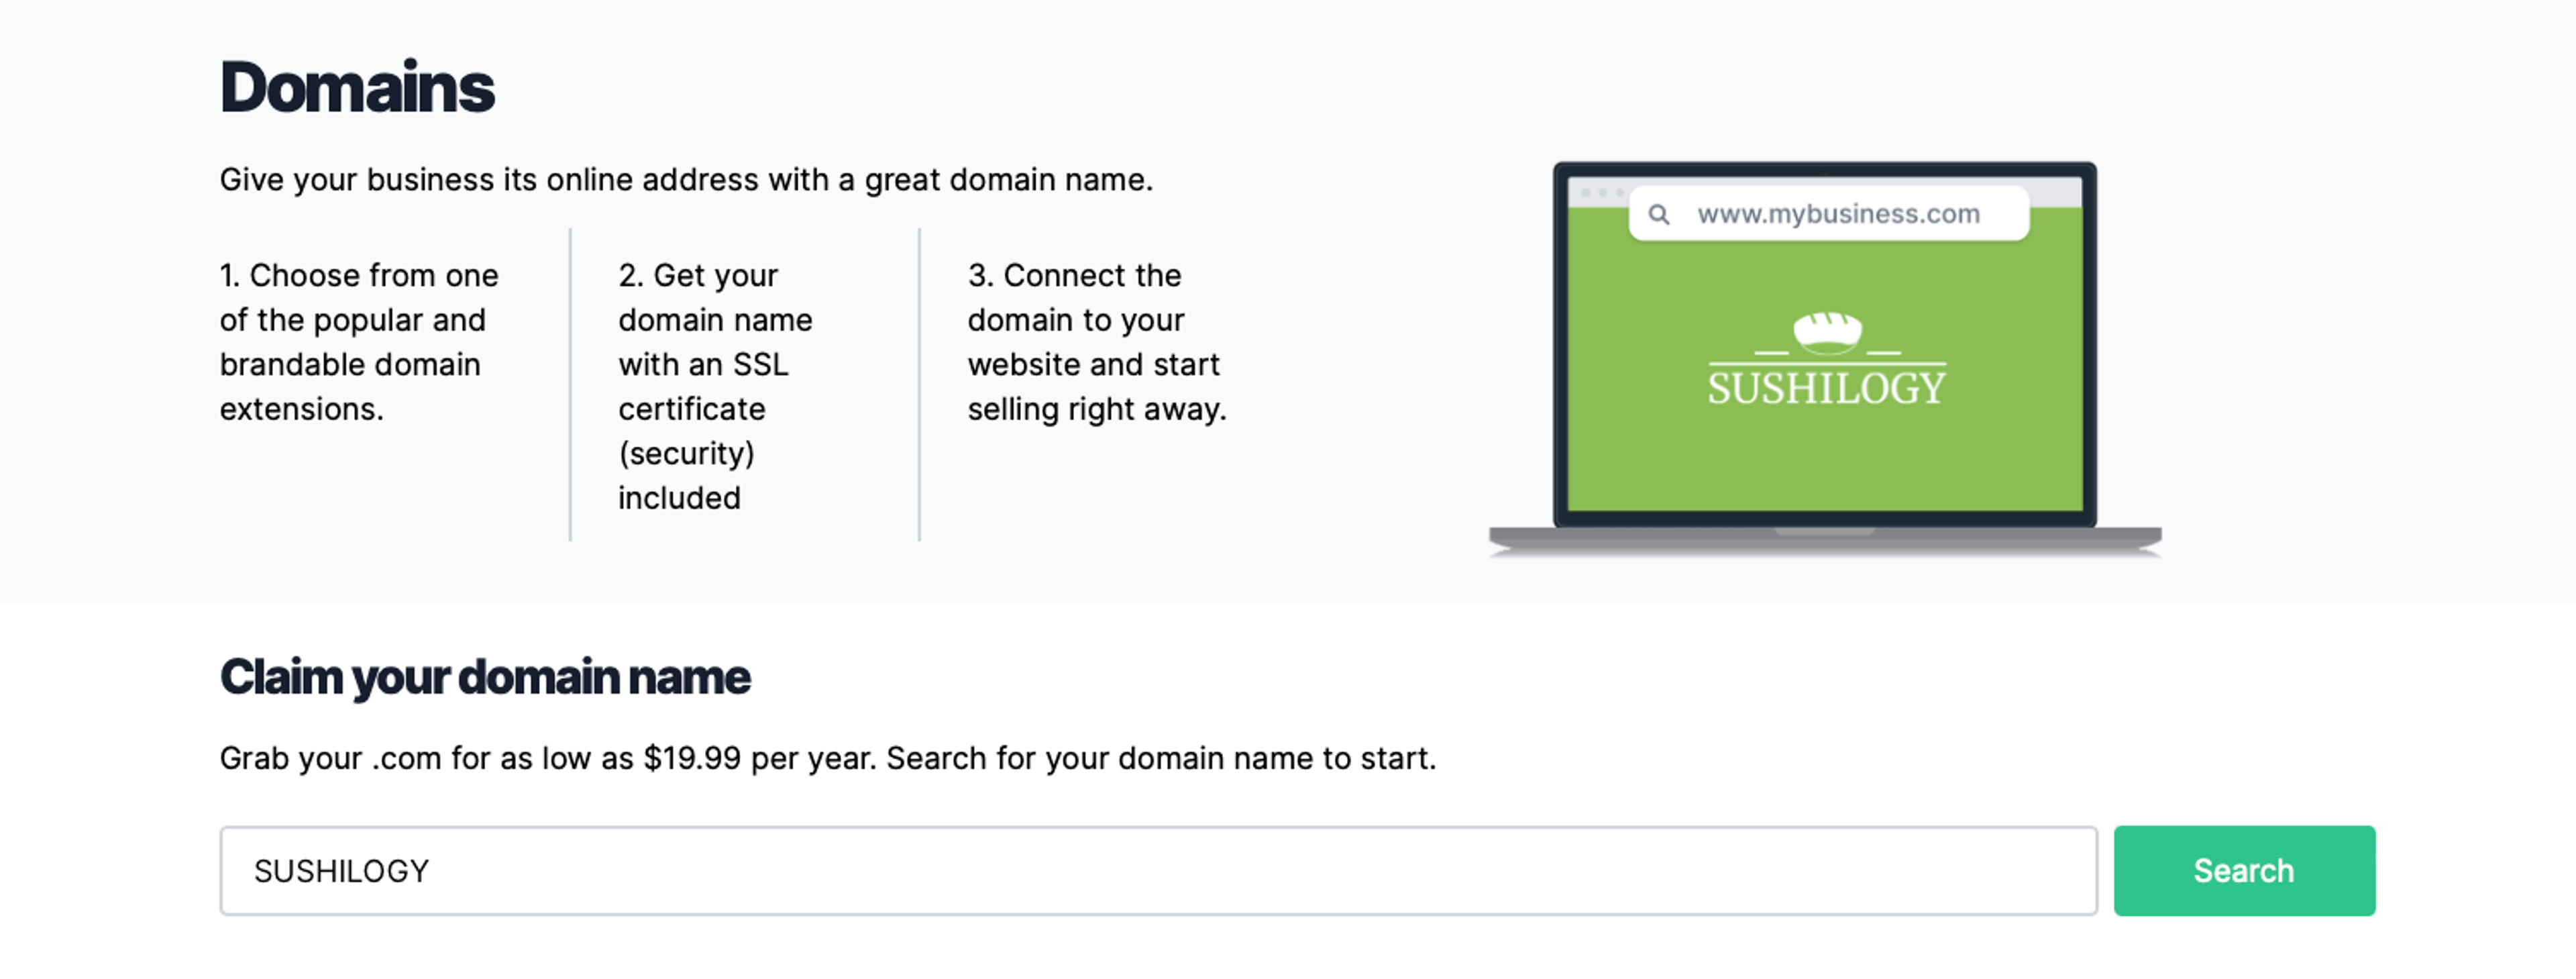 Type your business name and check for available domain names